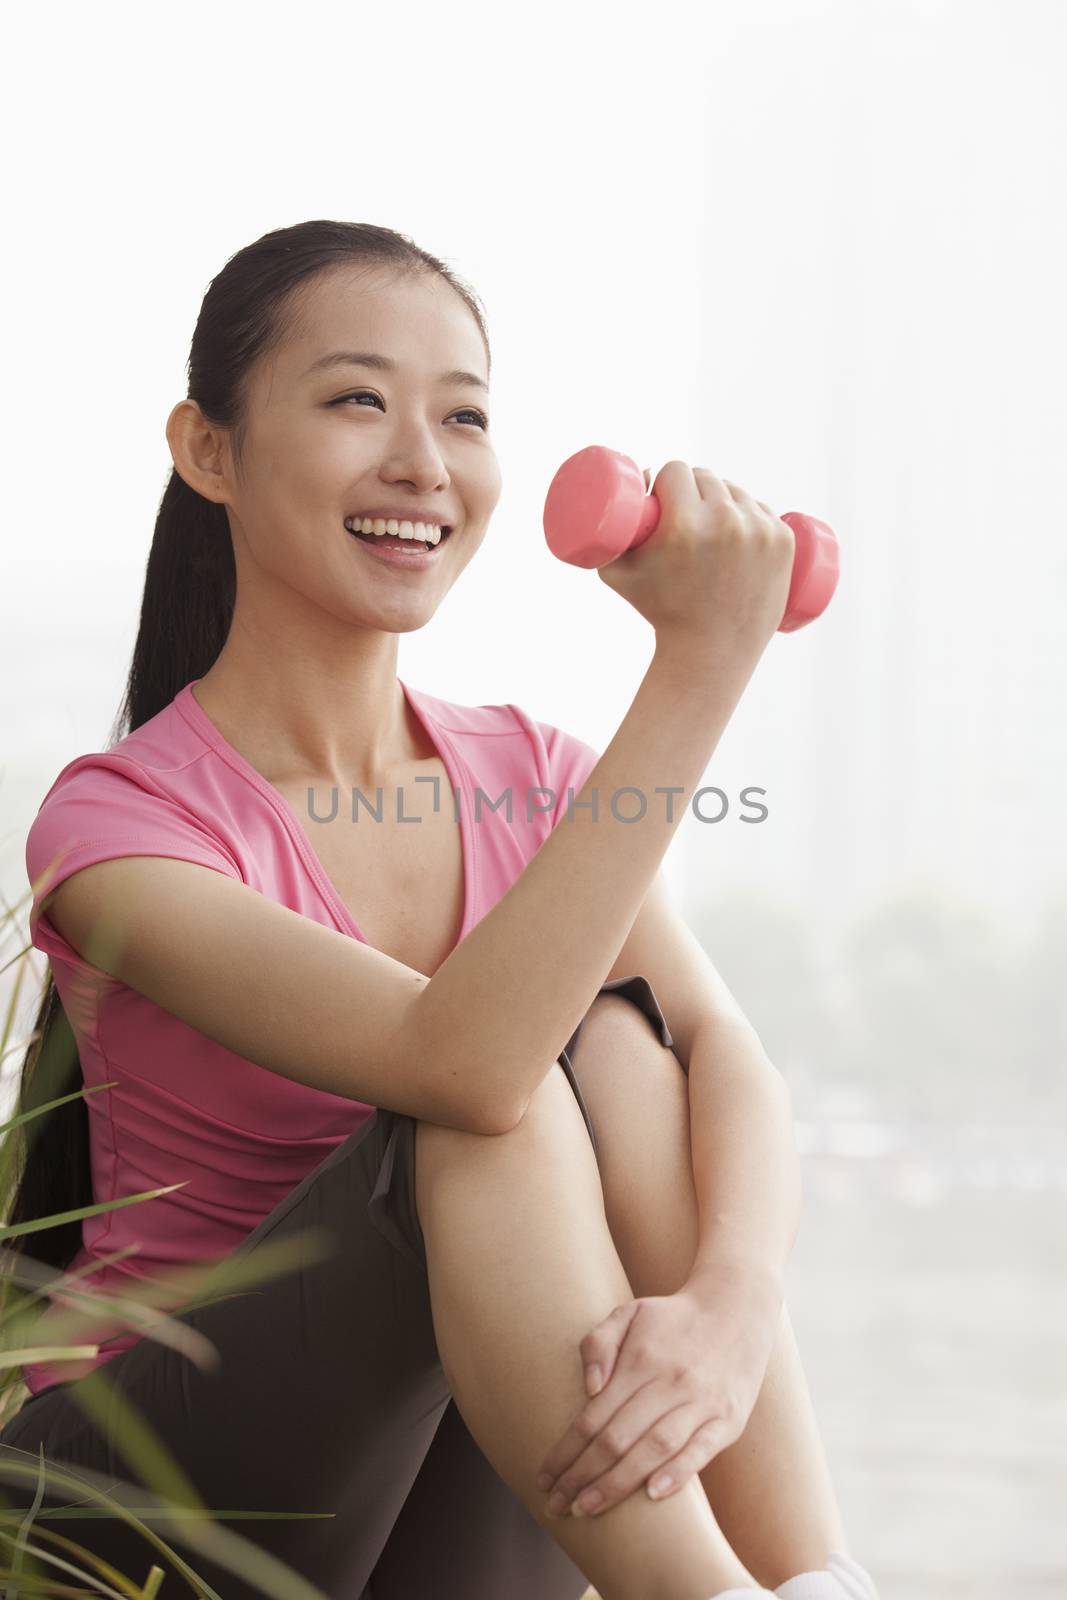 Young Woman Lifting Weights in the Park